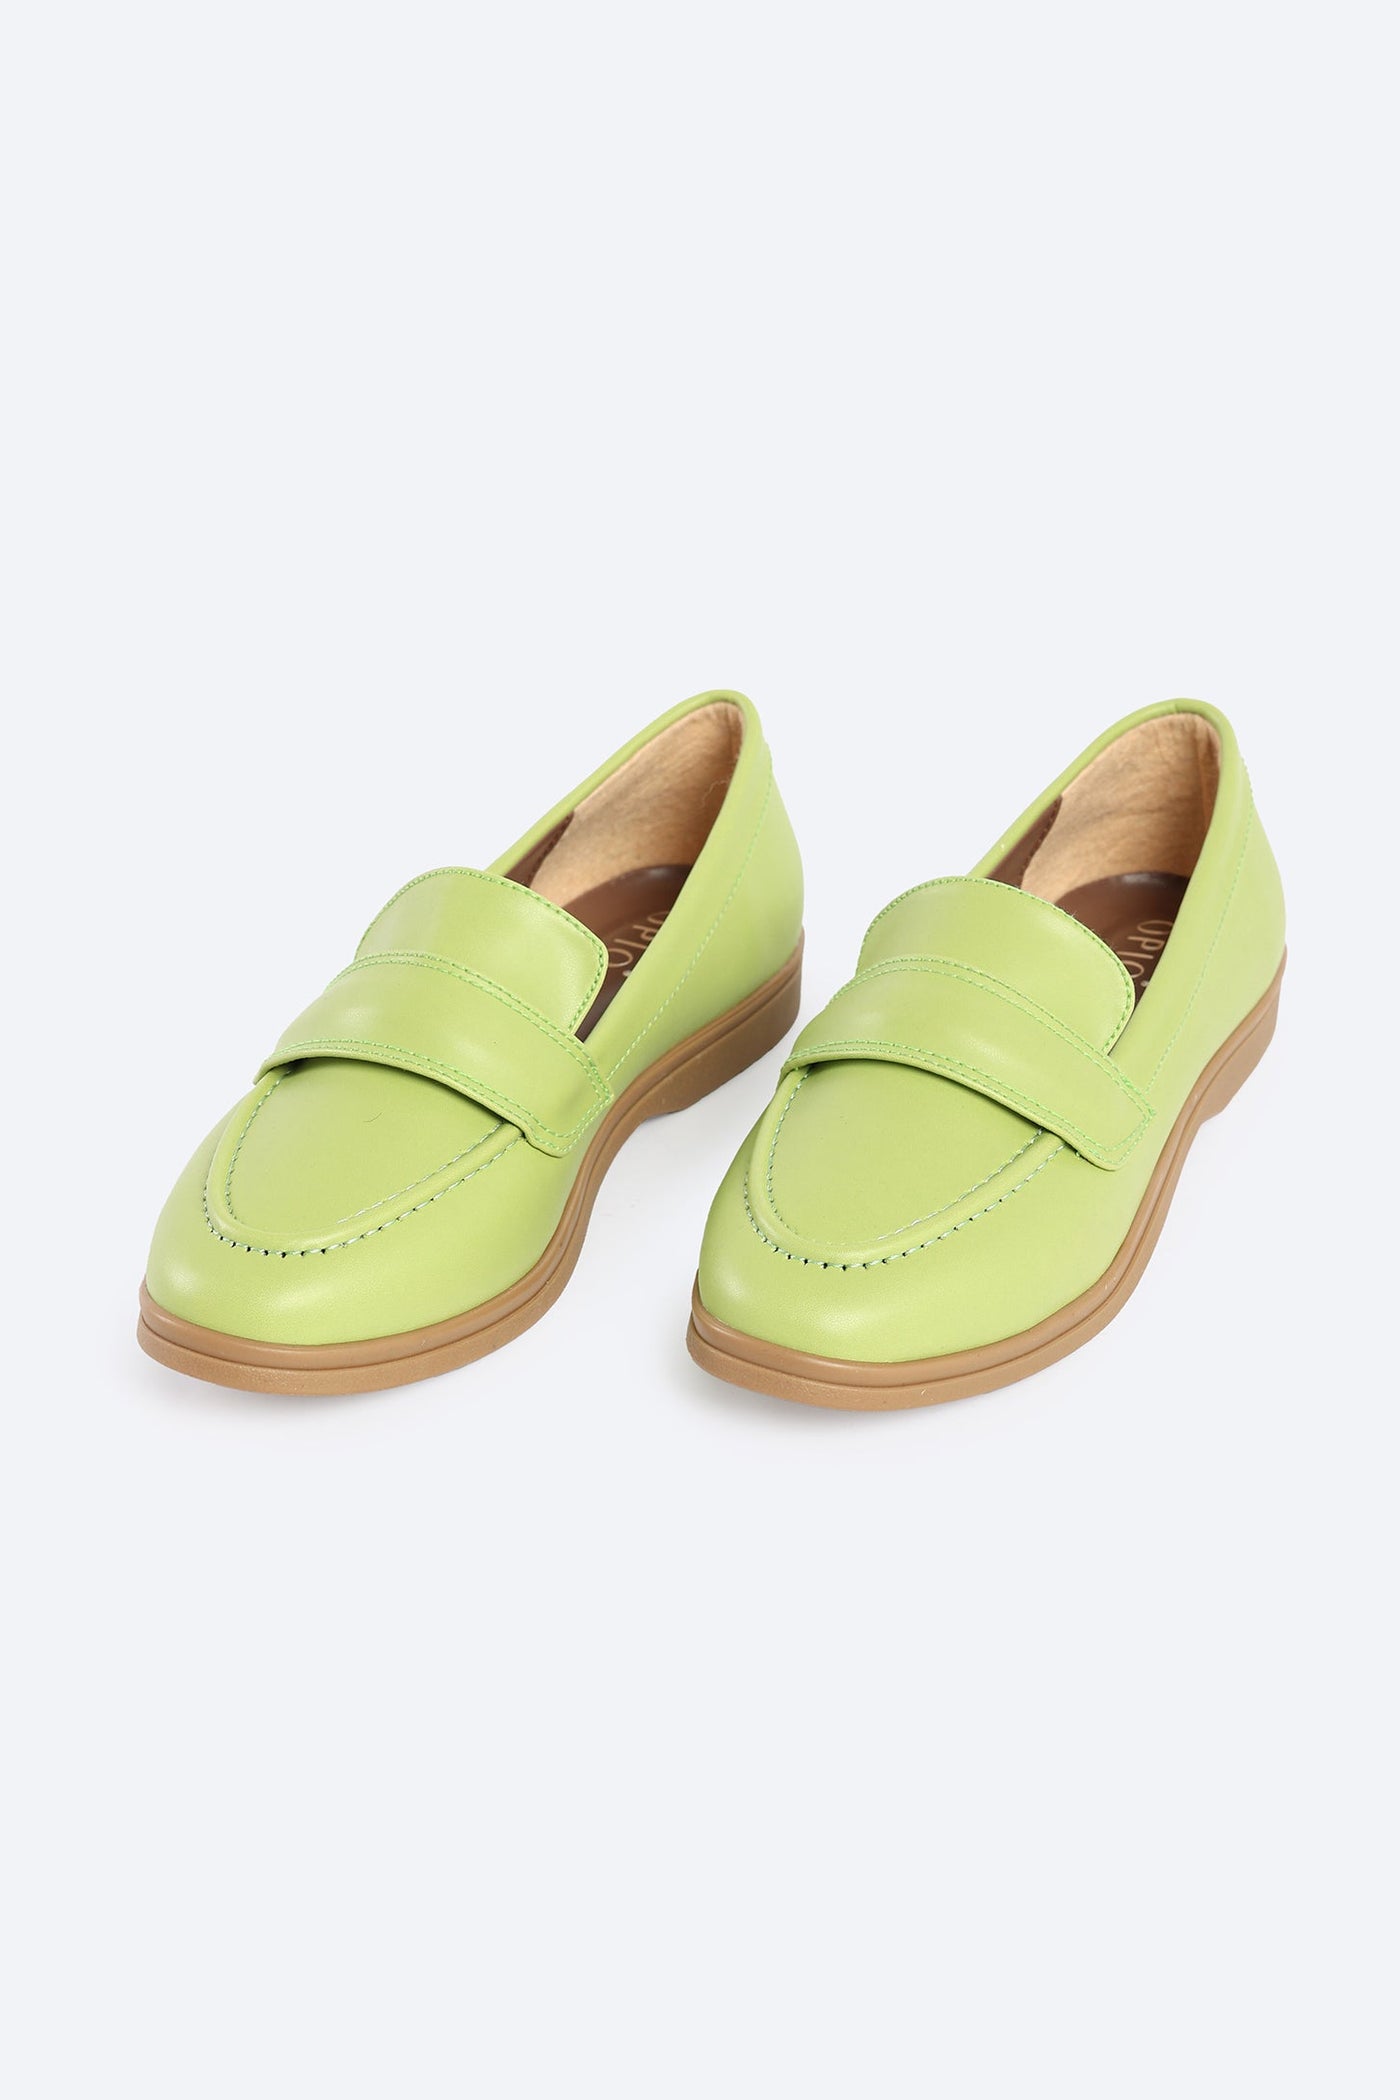 Everyday Ease Loafers - Lemon